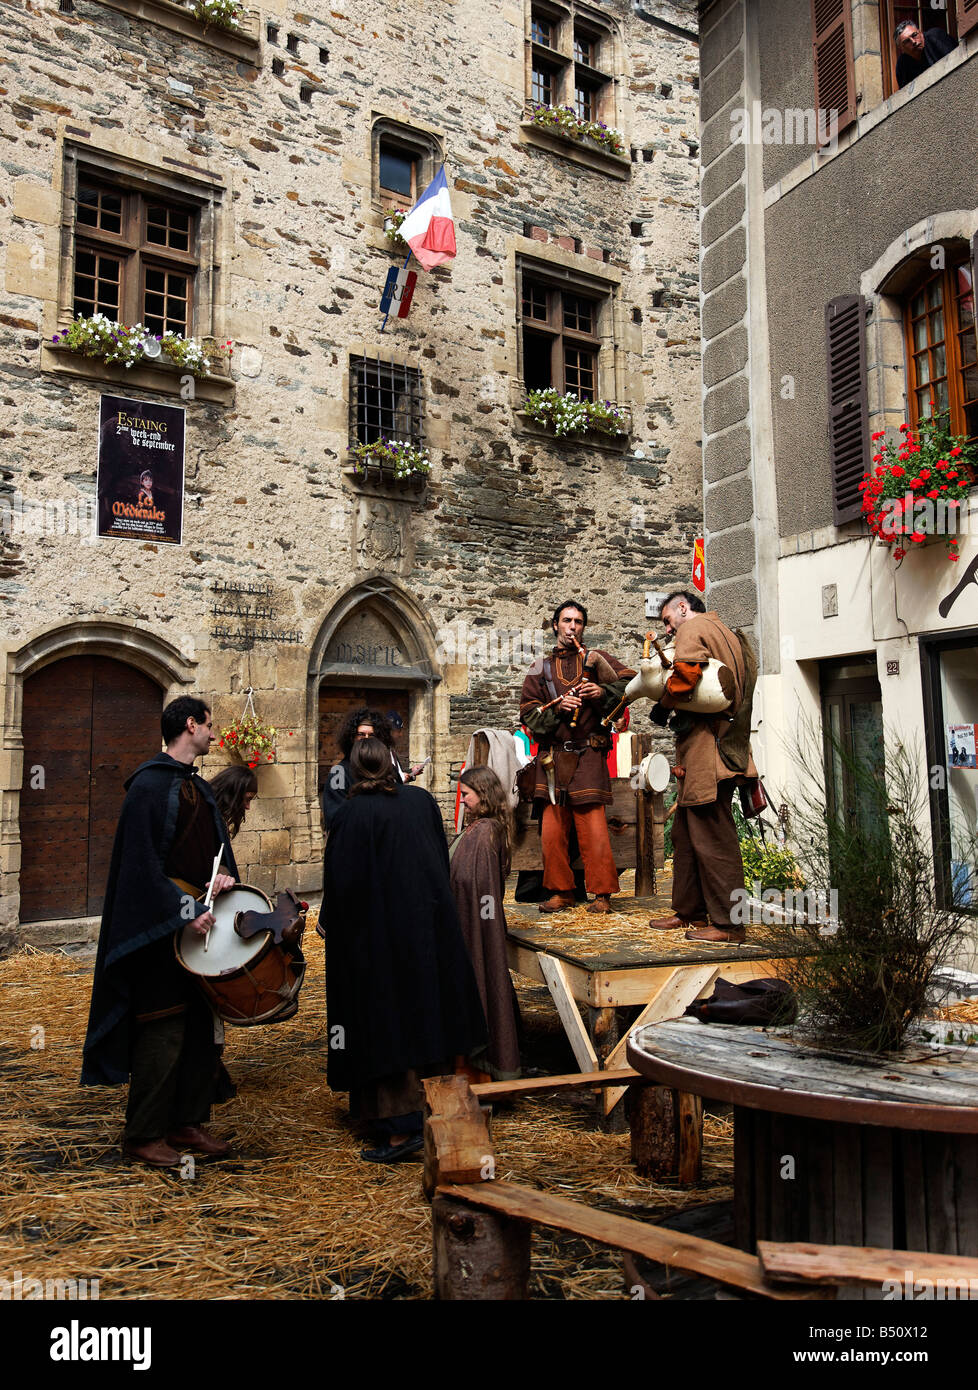 Muscians in Medieval costumes at Estaing Stock Photo